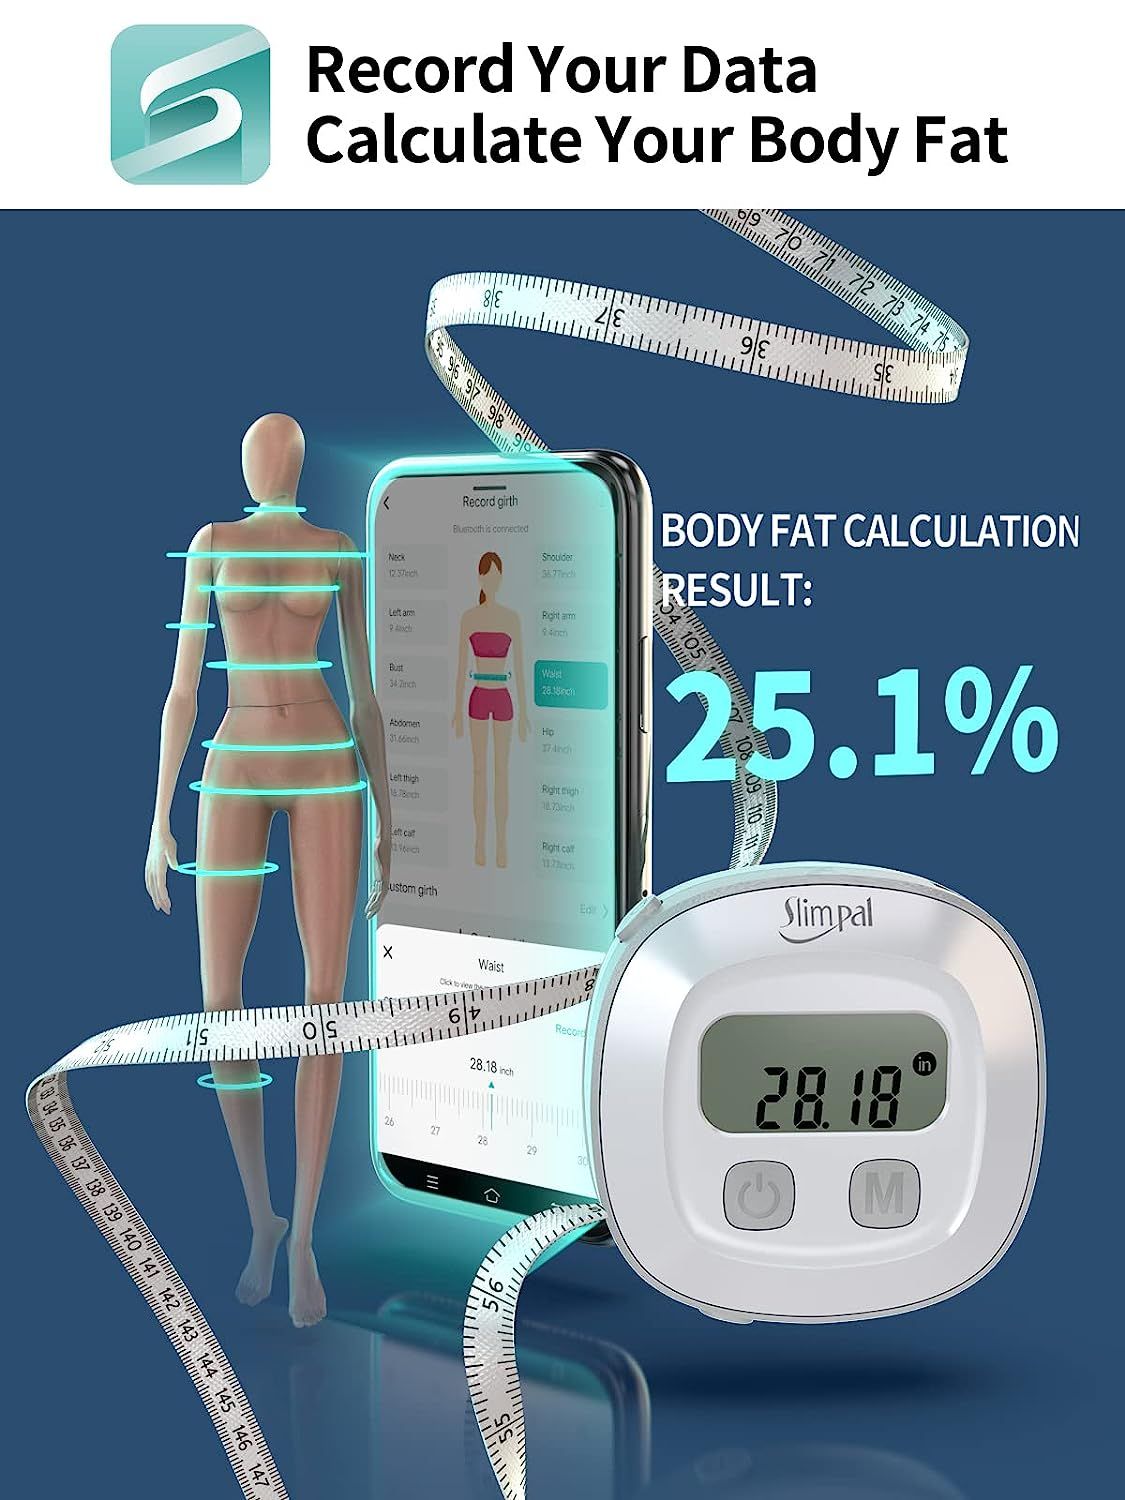 Slimpal Body Fat Tape Measure, Bluetooth Digital Smart Body Tape Measure  with LED Display, Retractable Measuring Tape for Fitness, Bodybuilding